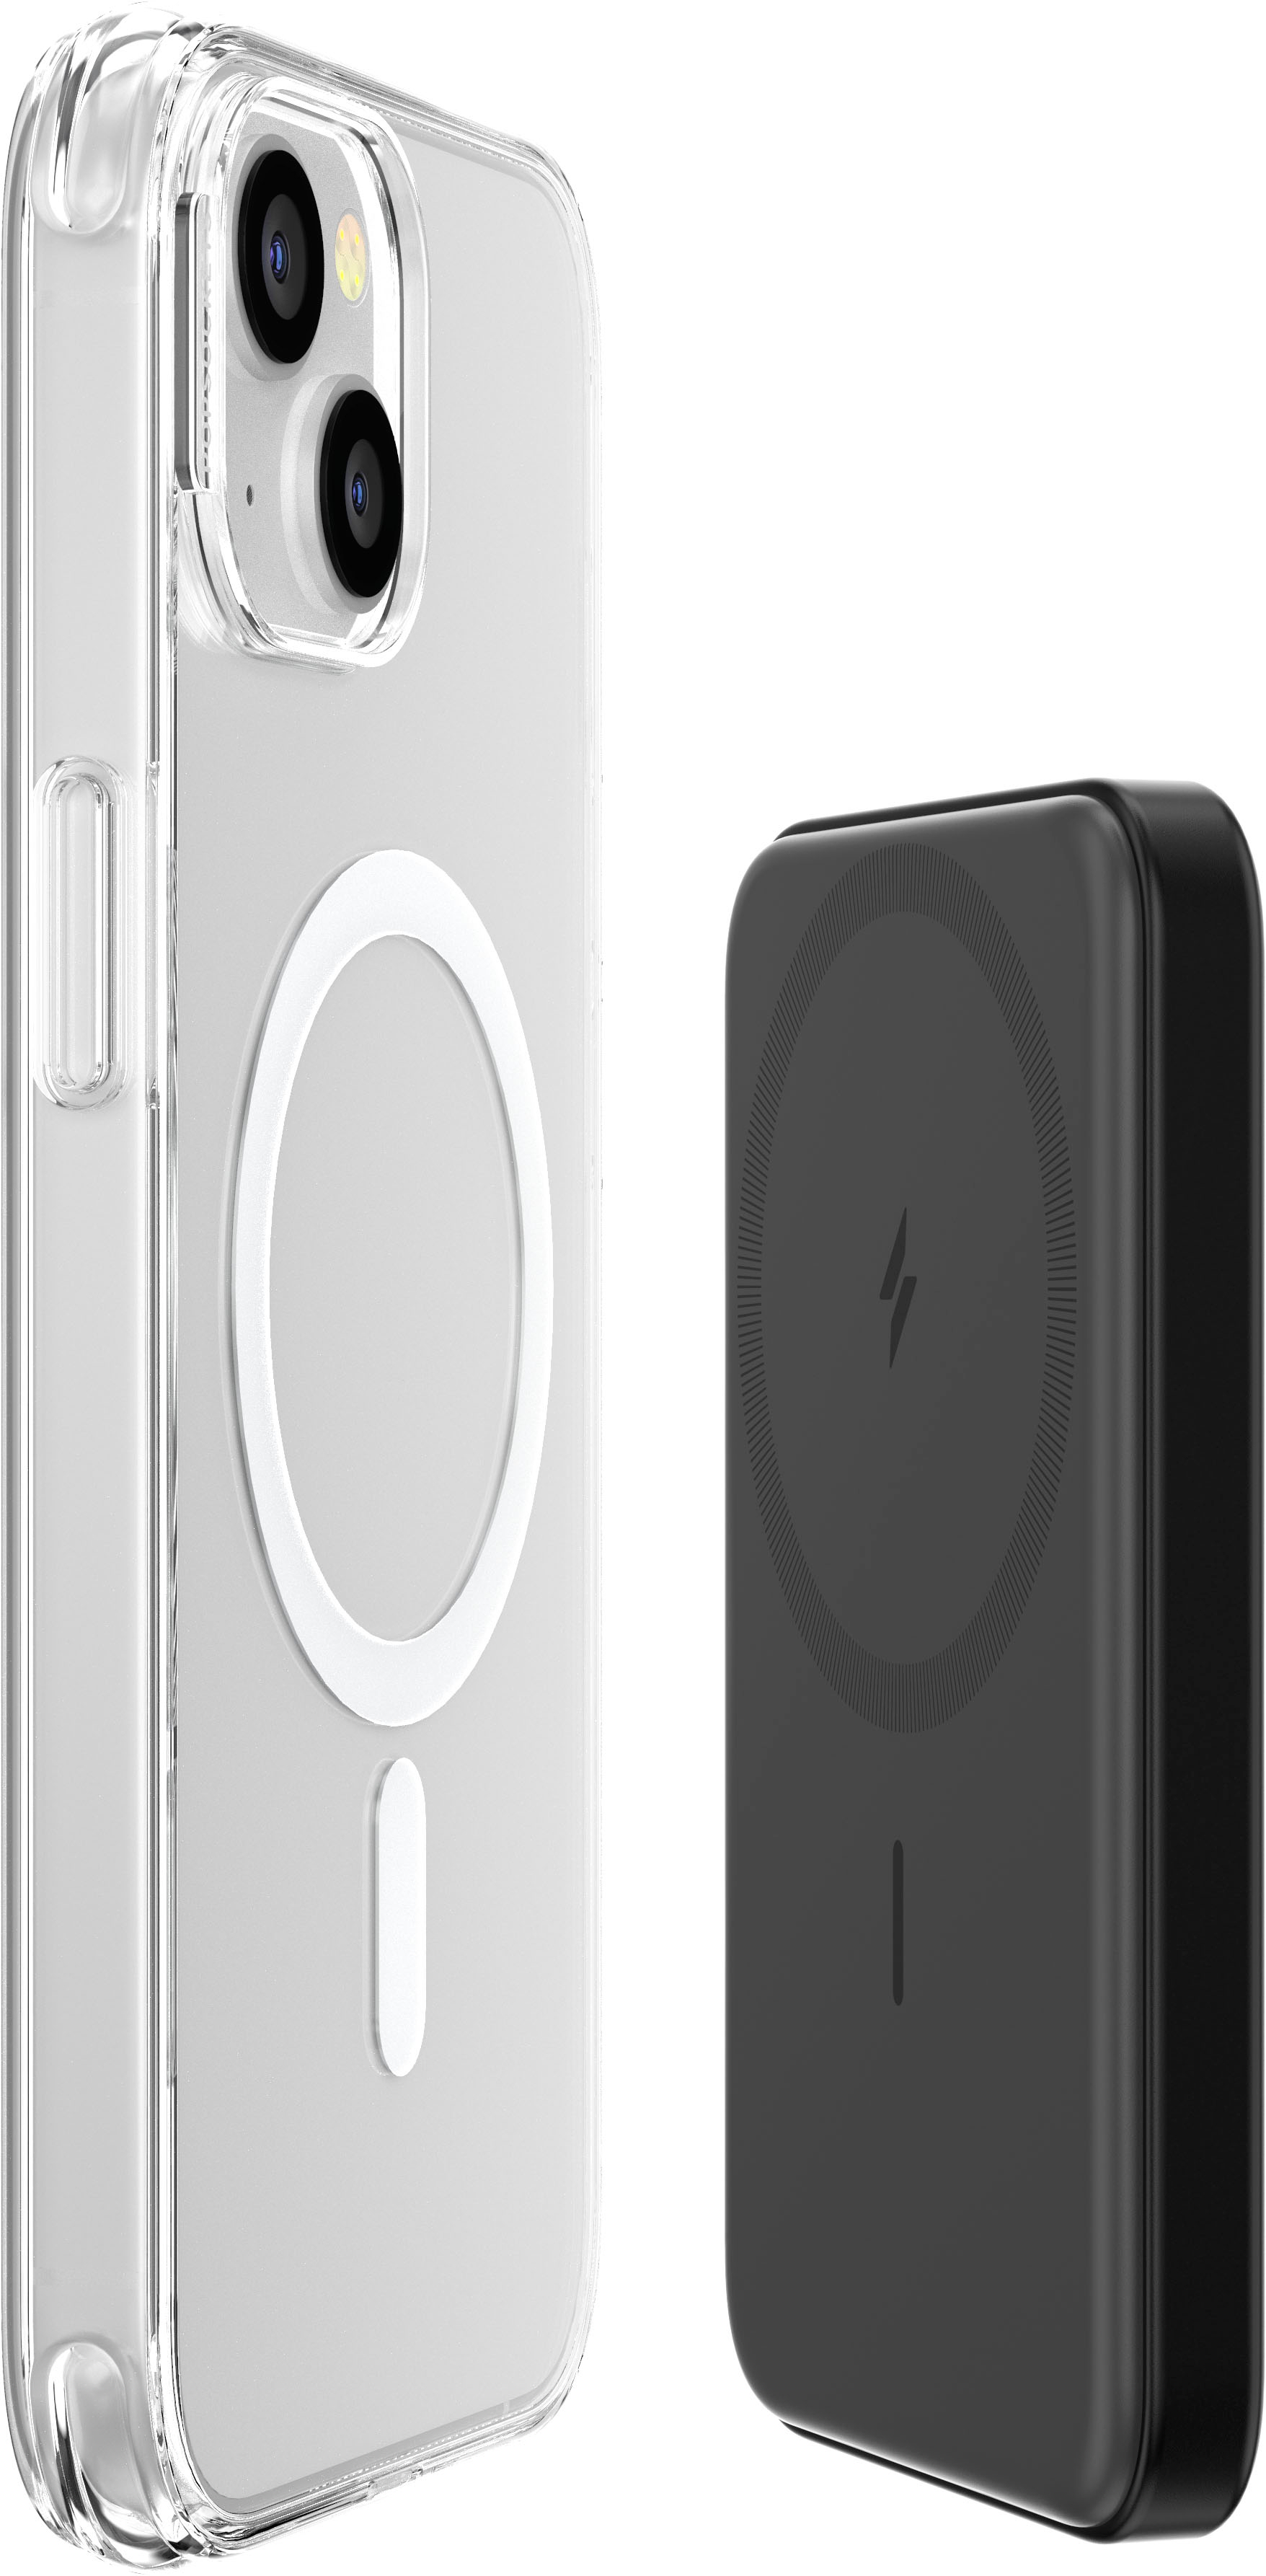 Anker PopSocket MagSafe power bank debuts with unique design